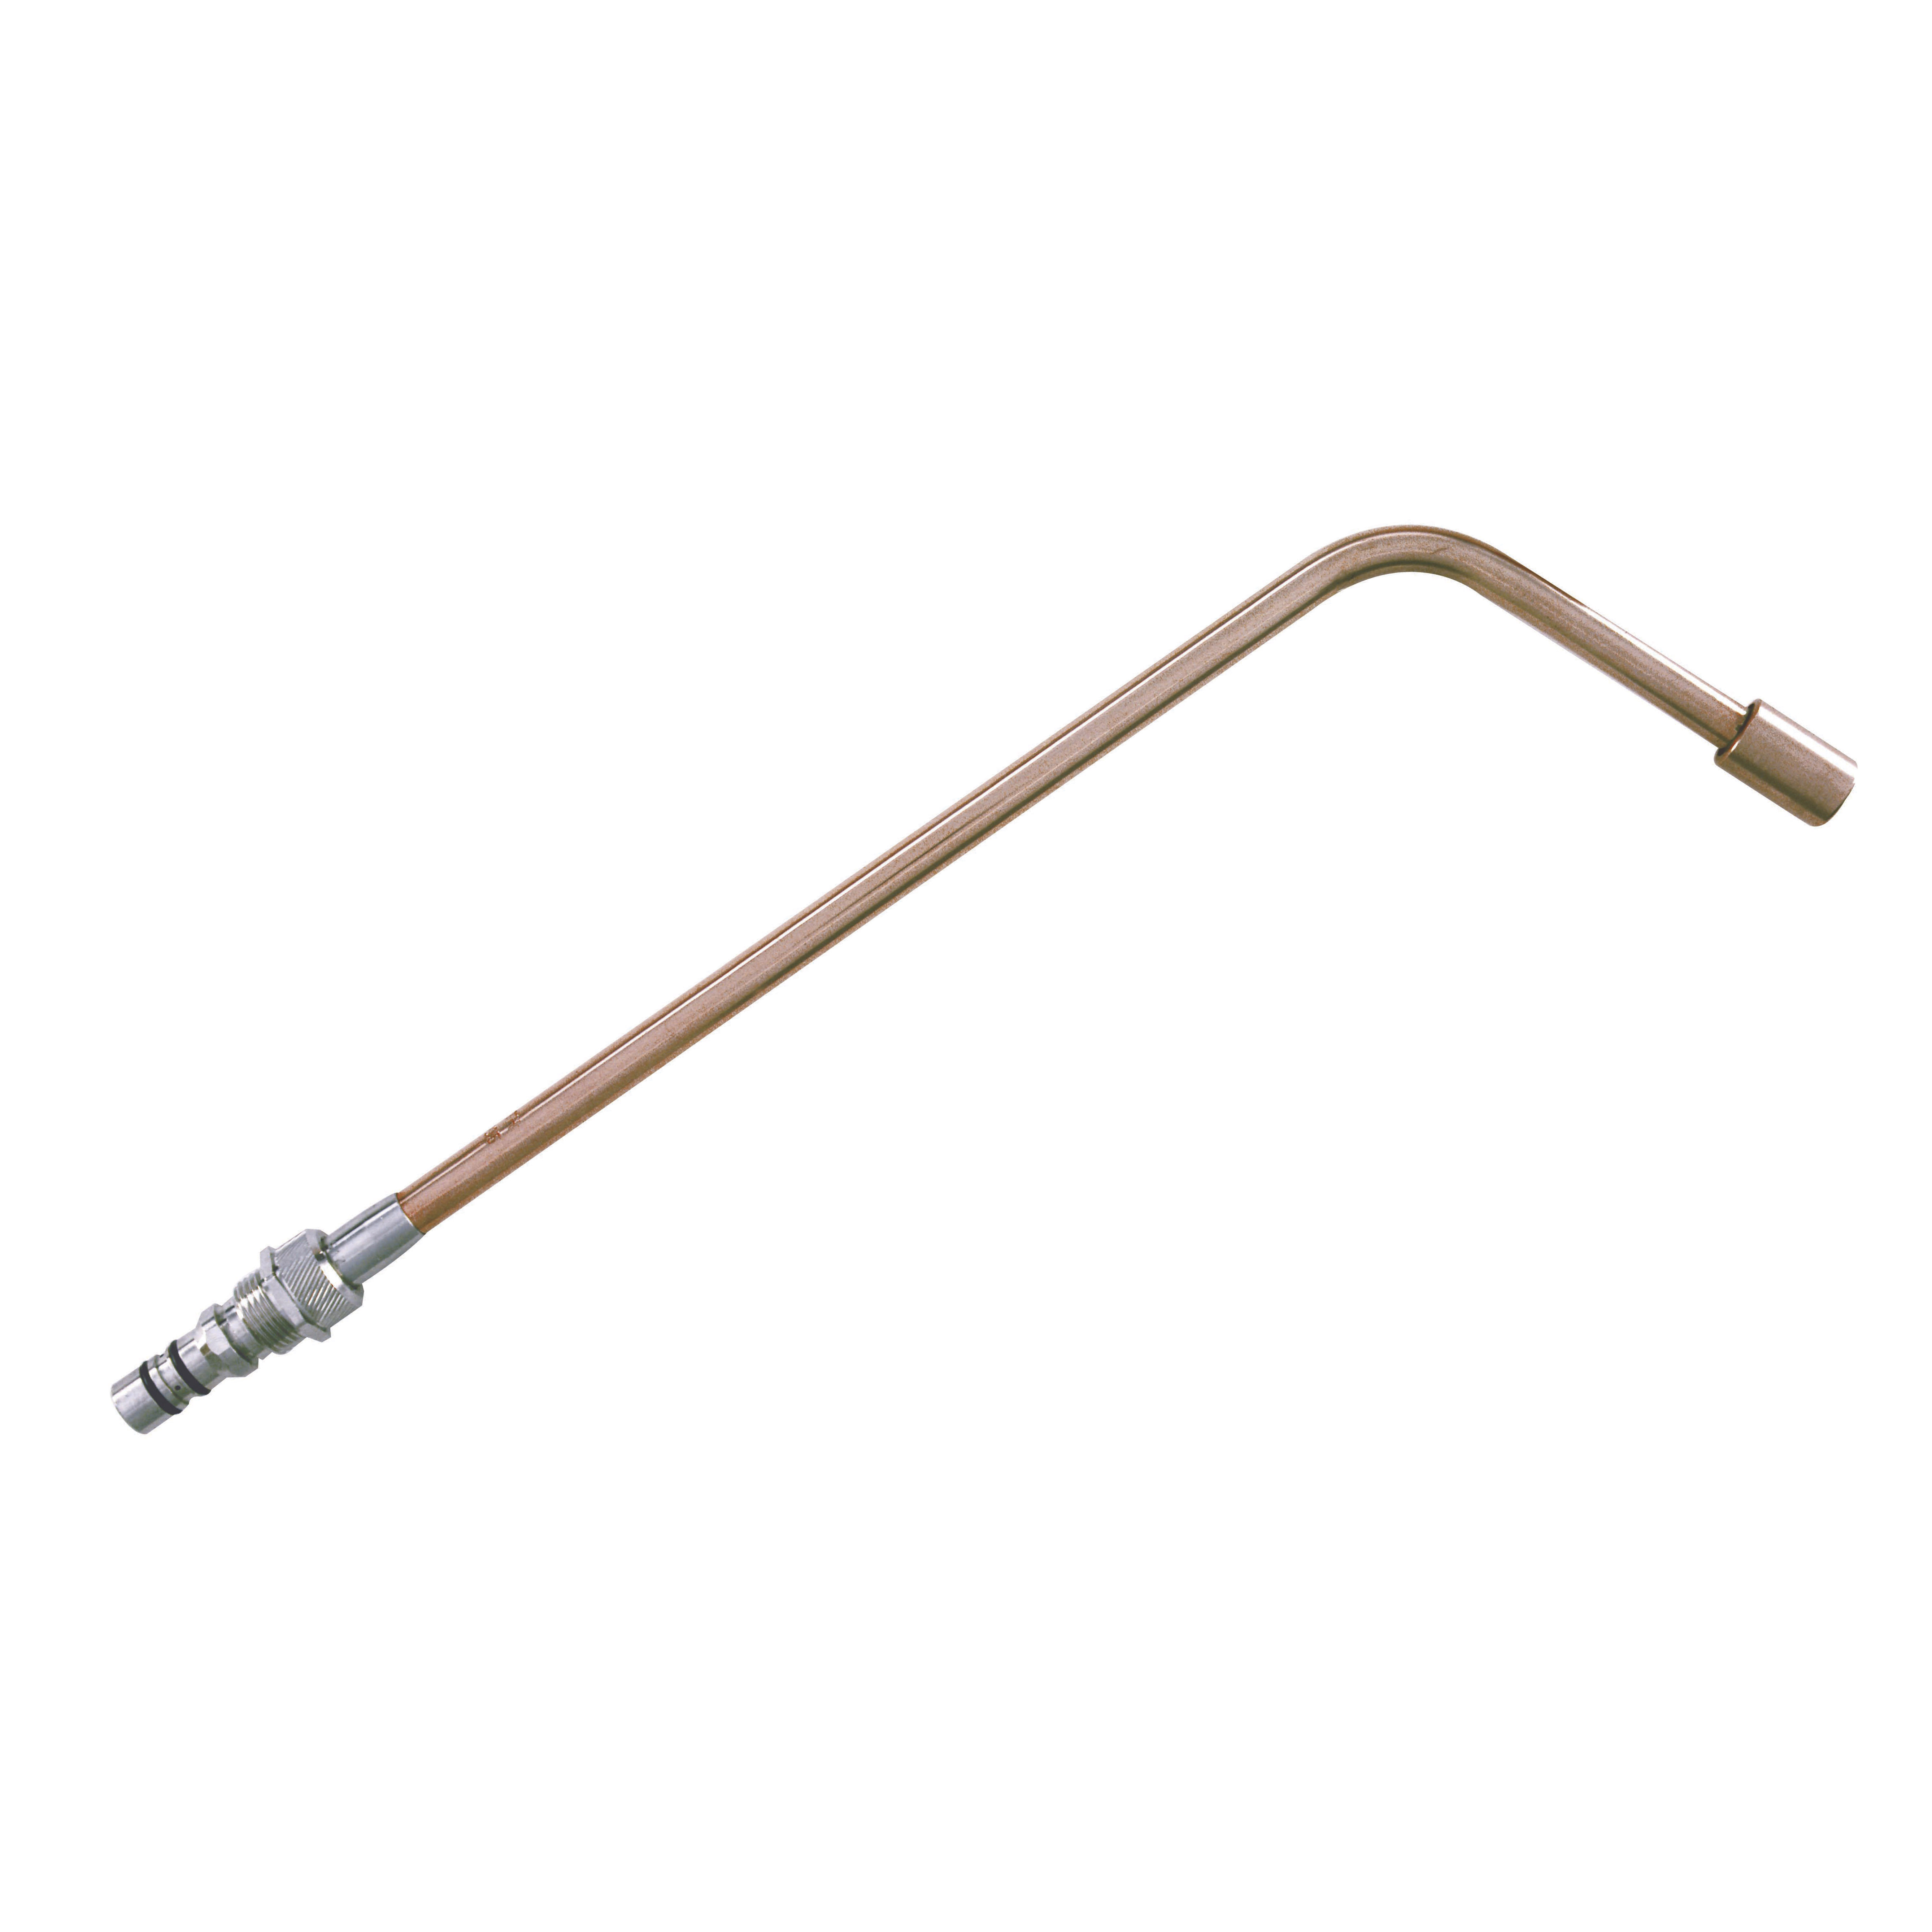 Miller Electric Company® ST605 Heating Tip Acetylene-Size: 124,670 BTU